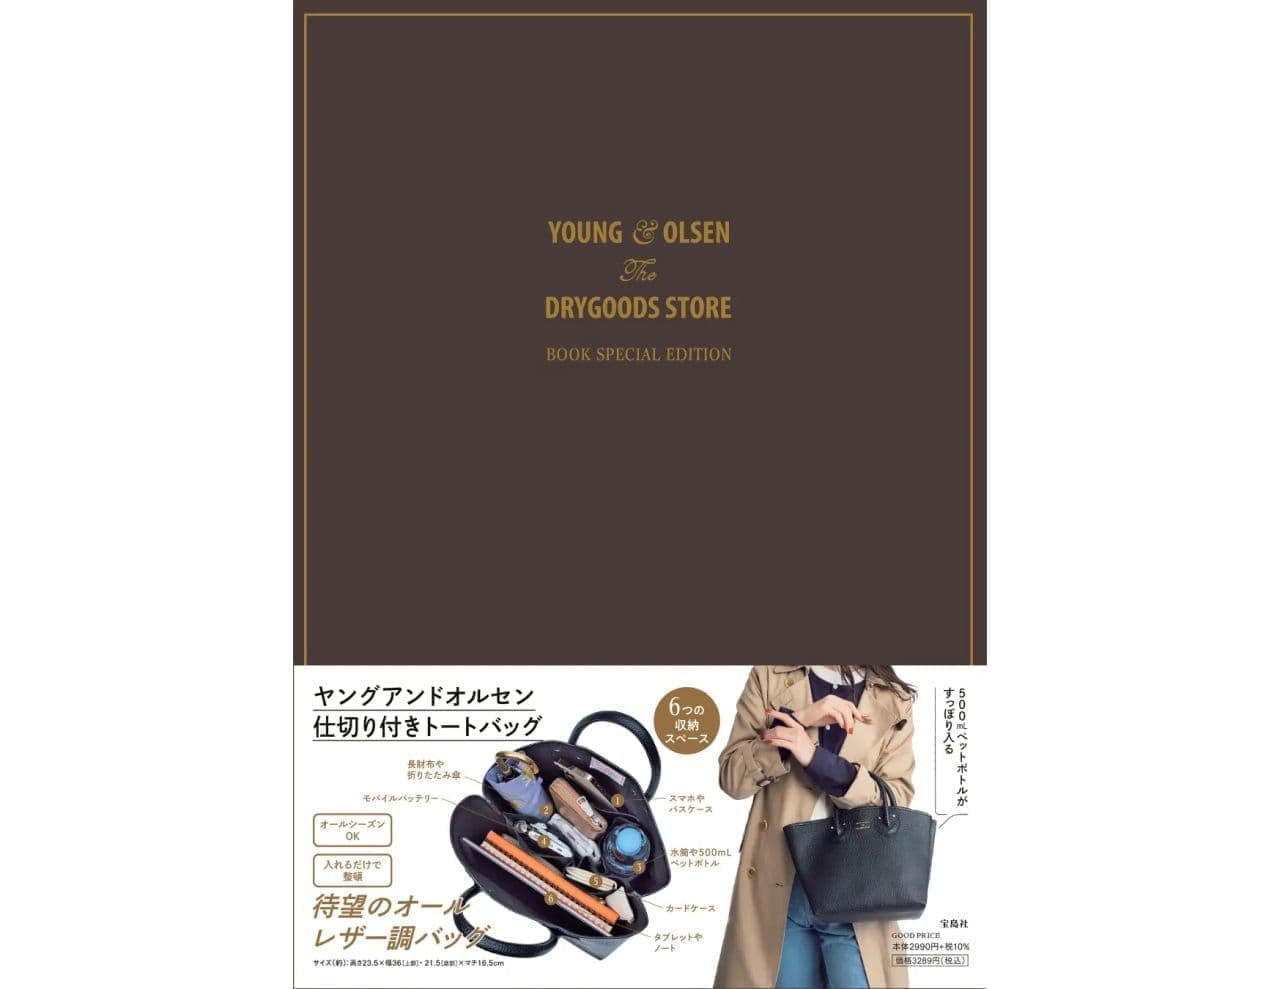 Takarajimasha “YOUNG & OLSEN The DRYGOODS STORE BOOK SPECIAL EDITION”